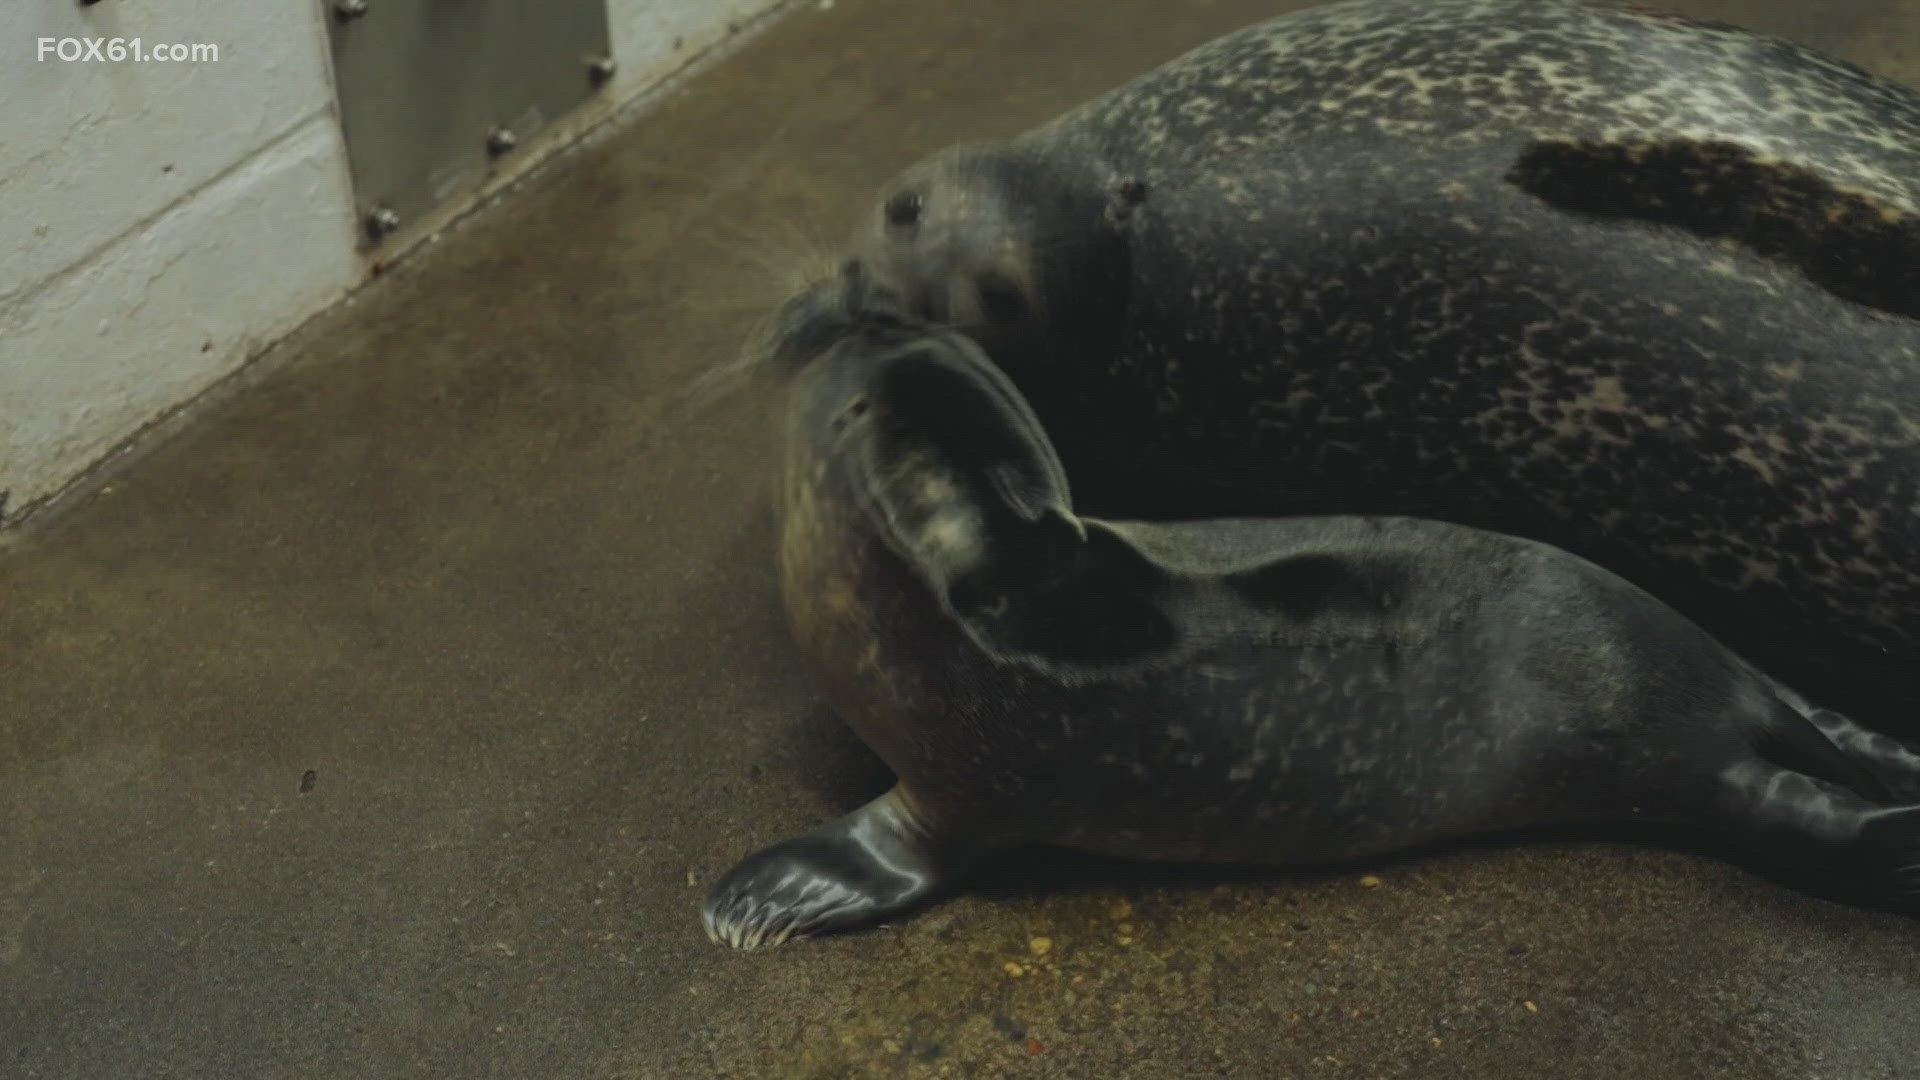 The seal was born to mom "Pearl", who has been at the aquarium for more than a decade. The baby seal has yet to be named.